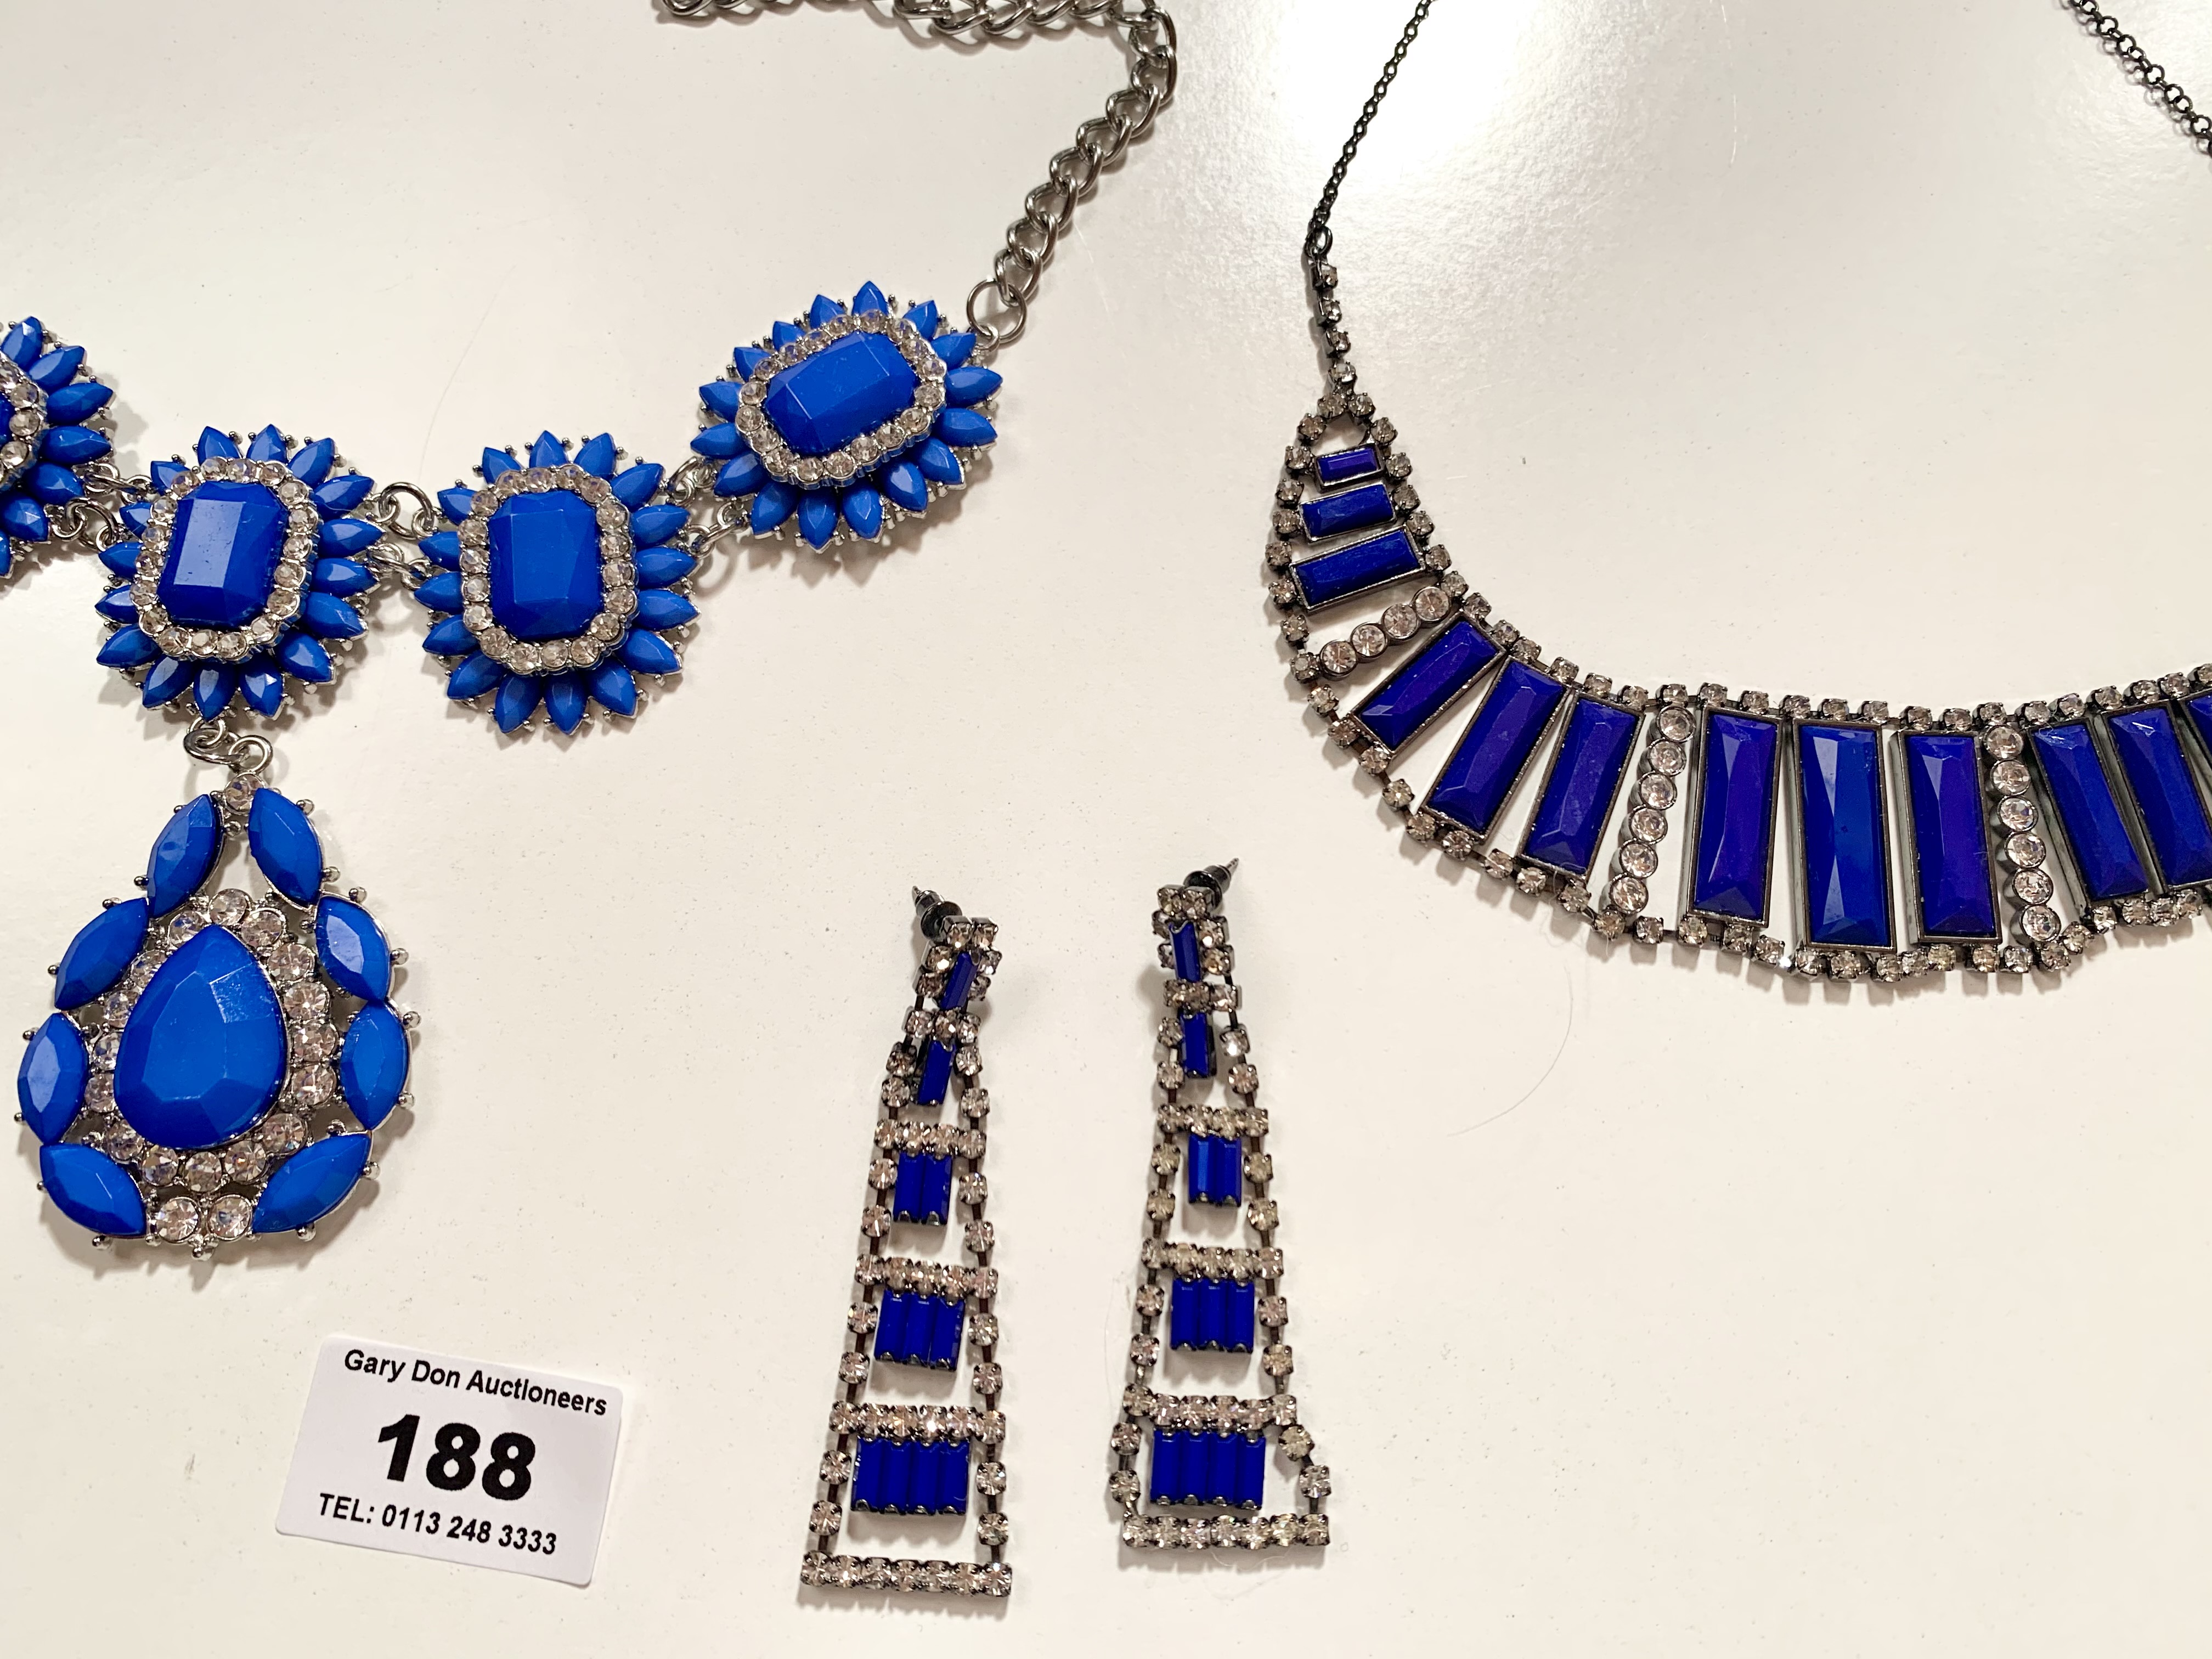 2 blue dress necklaces, pair of blue dress earrings and blue dress bracelet - Image 2 of 2